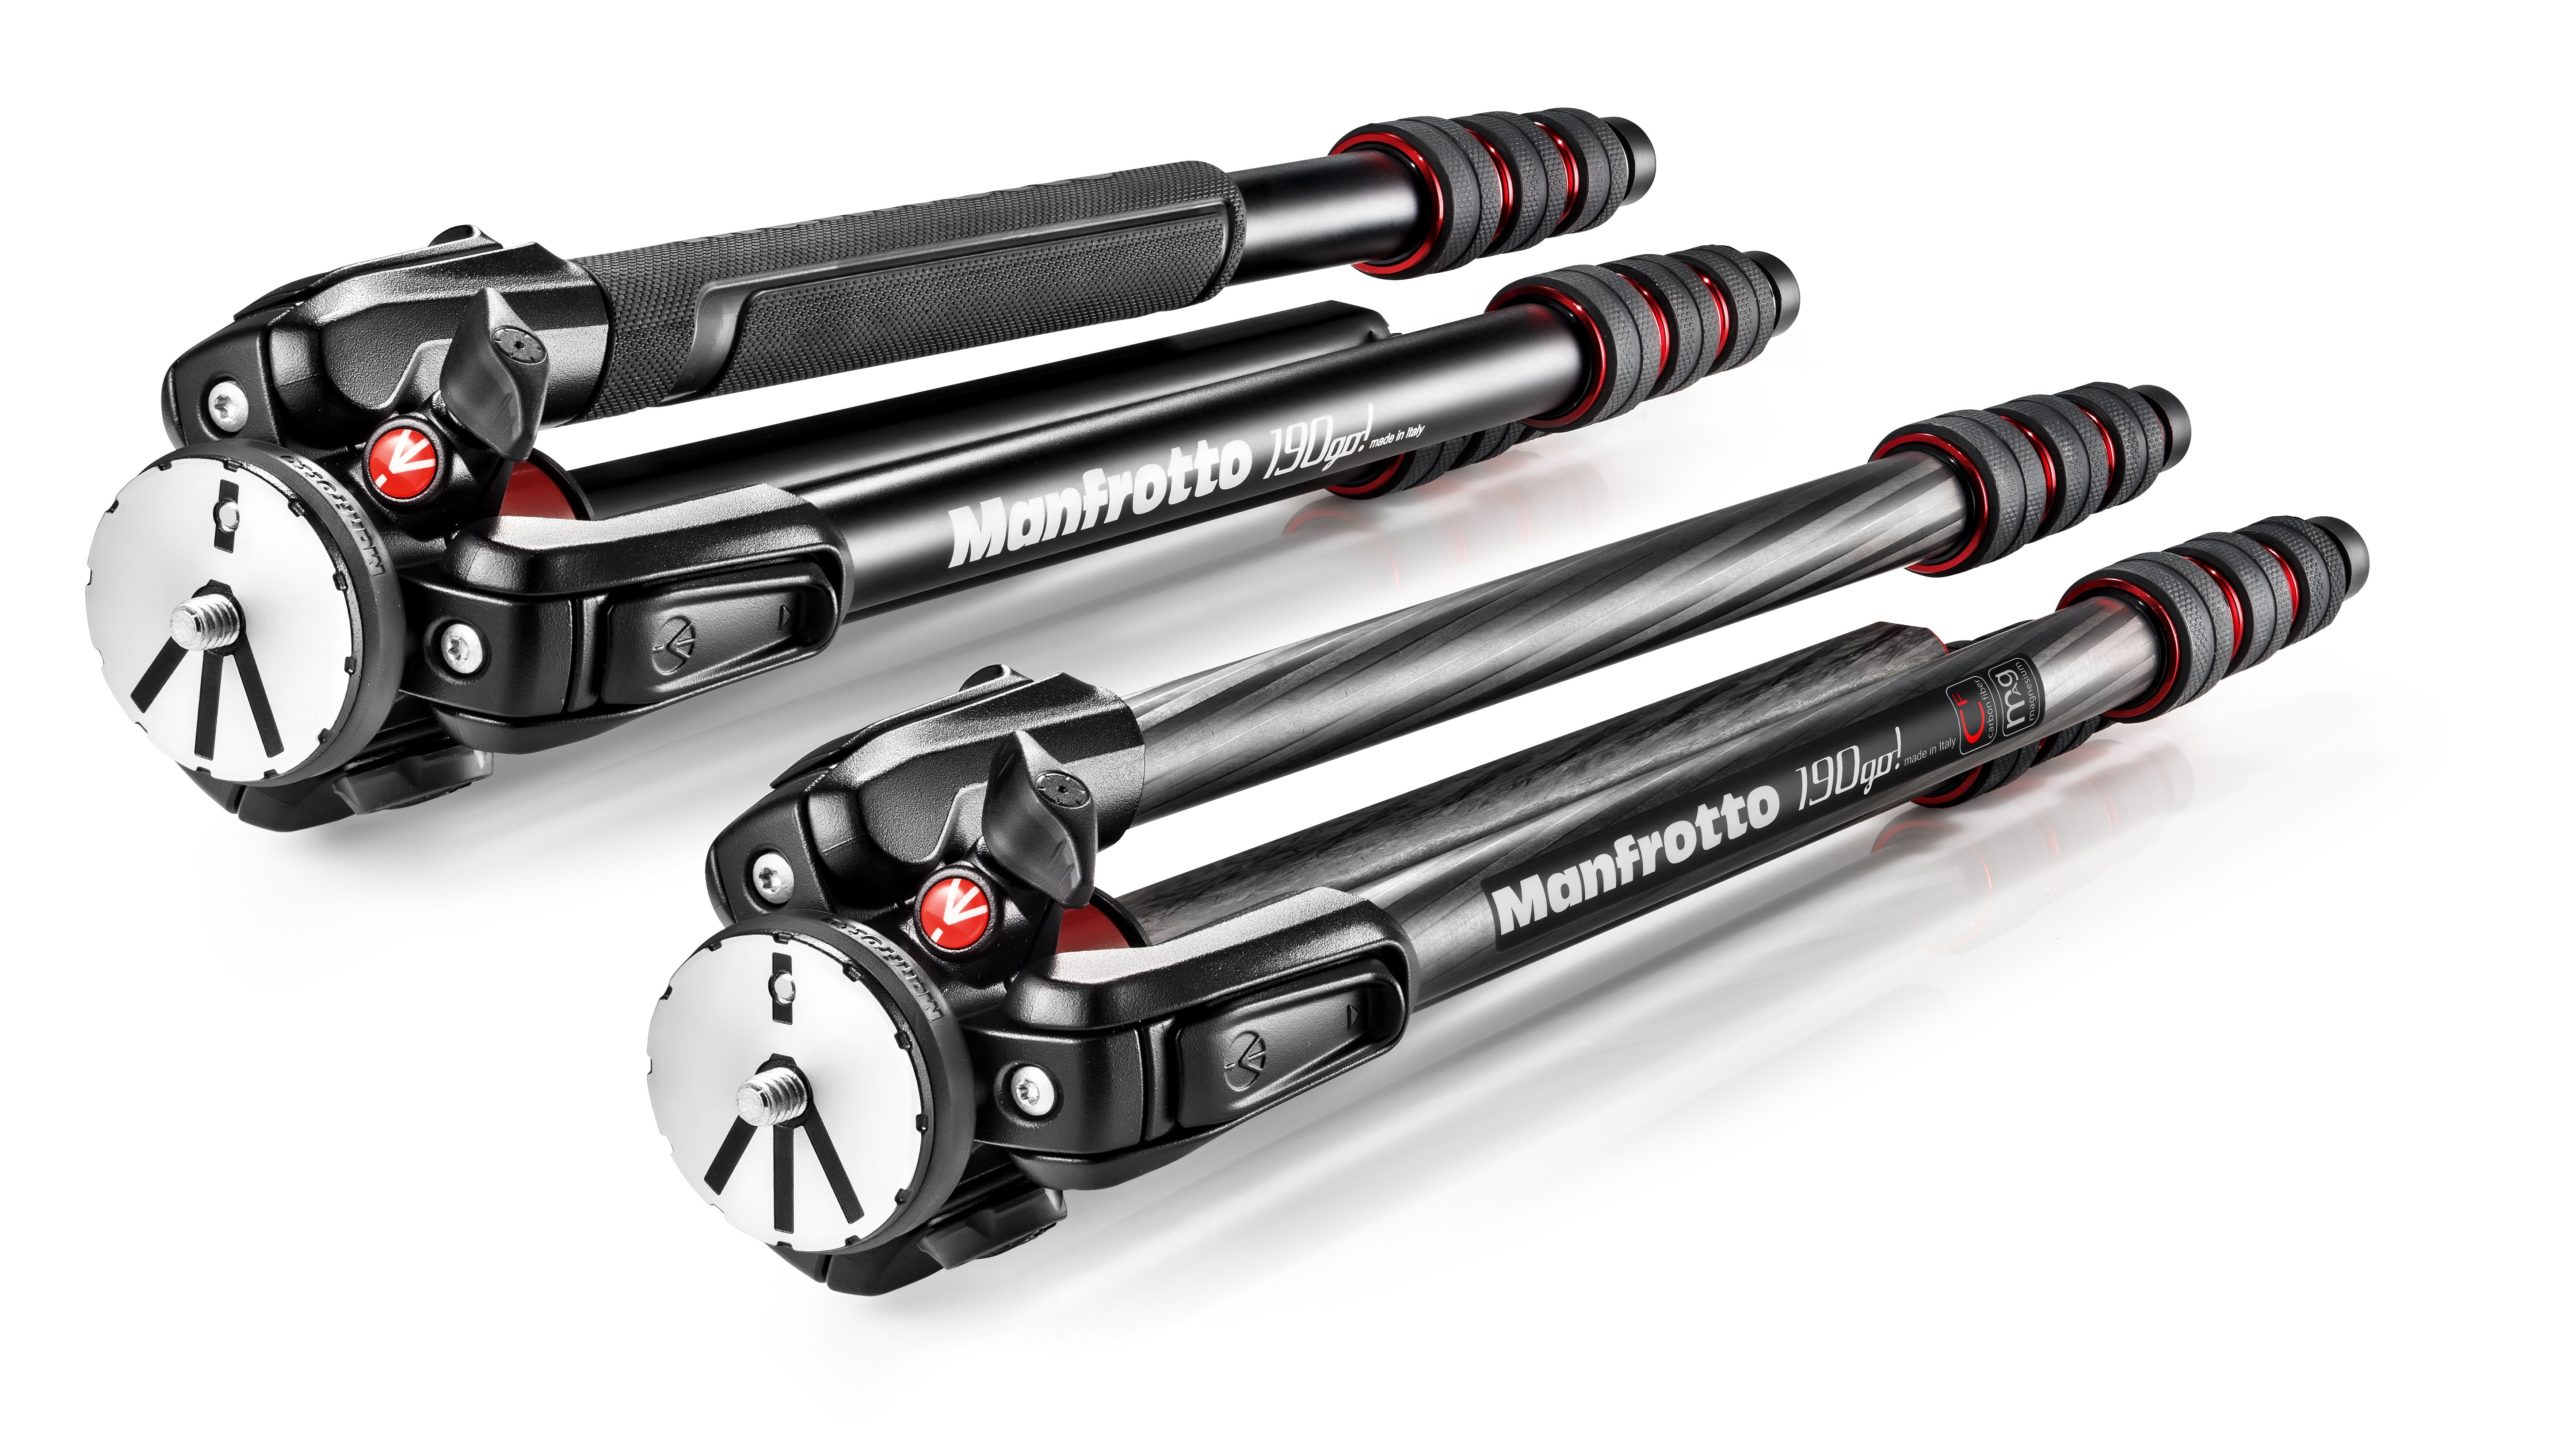 Manfrotto 190Go Carbon Alu 1 scaled